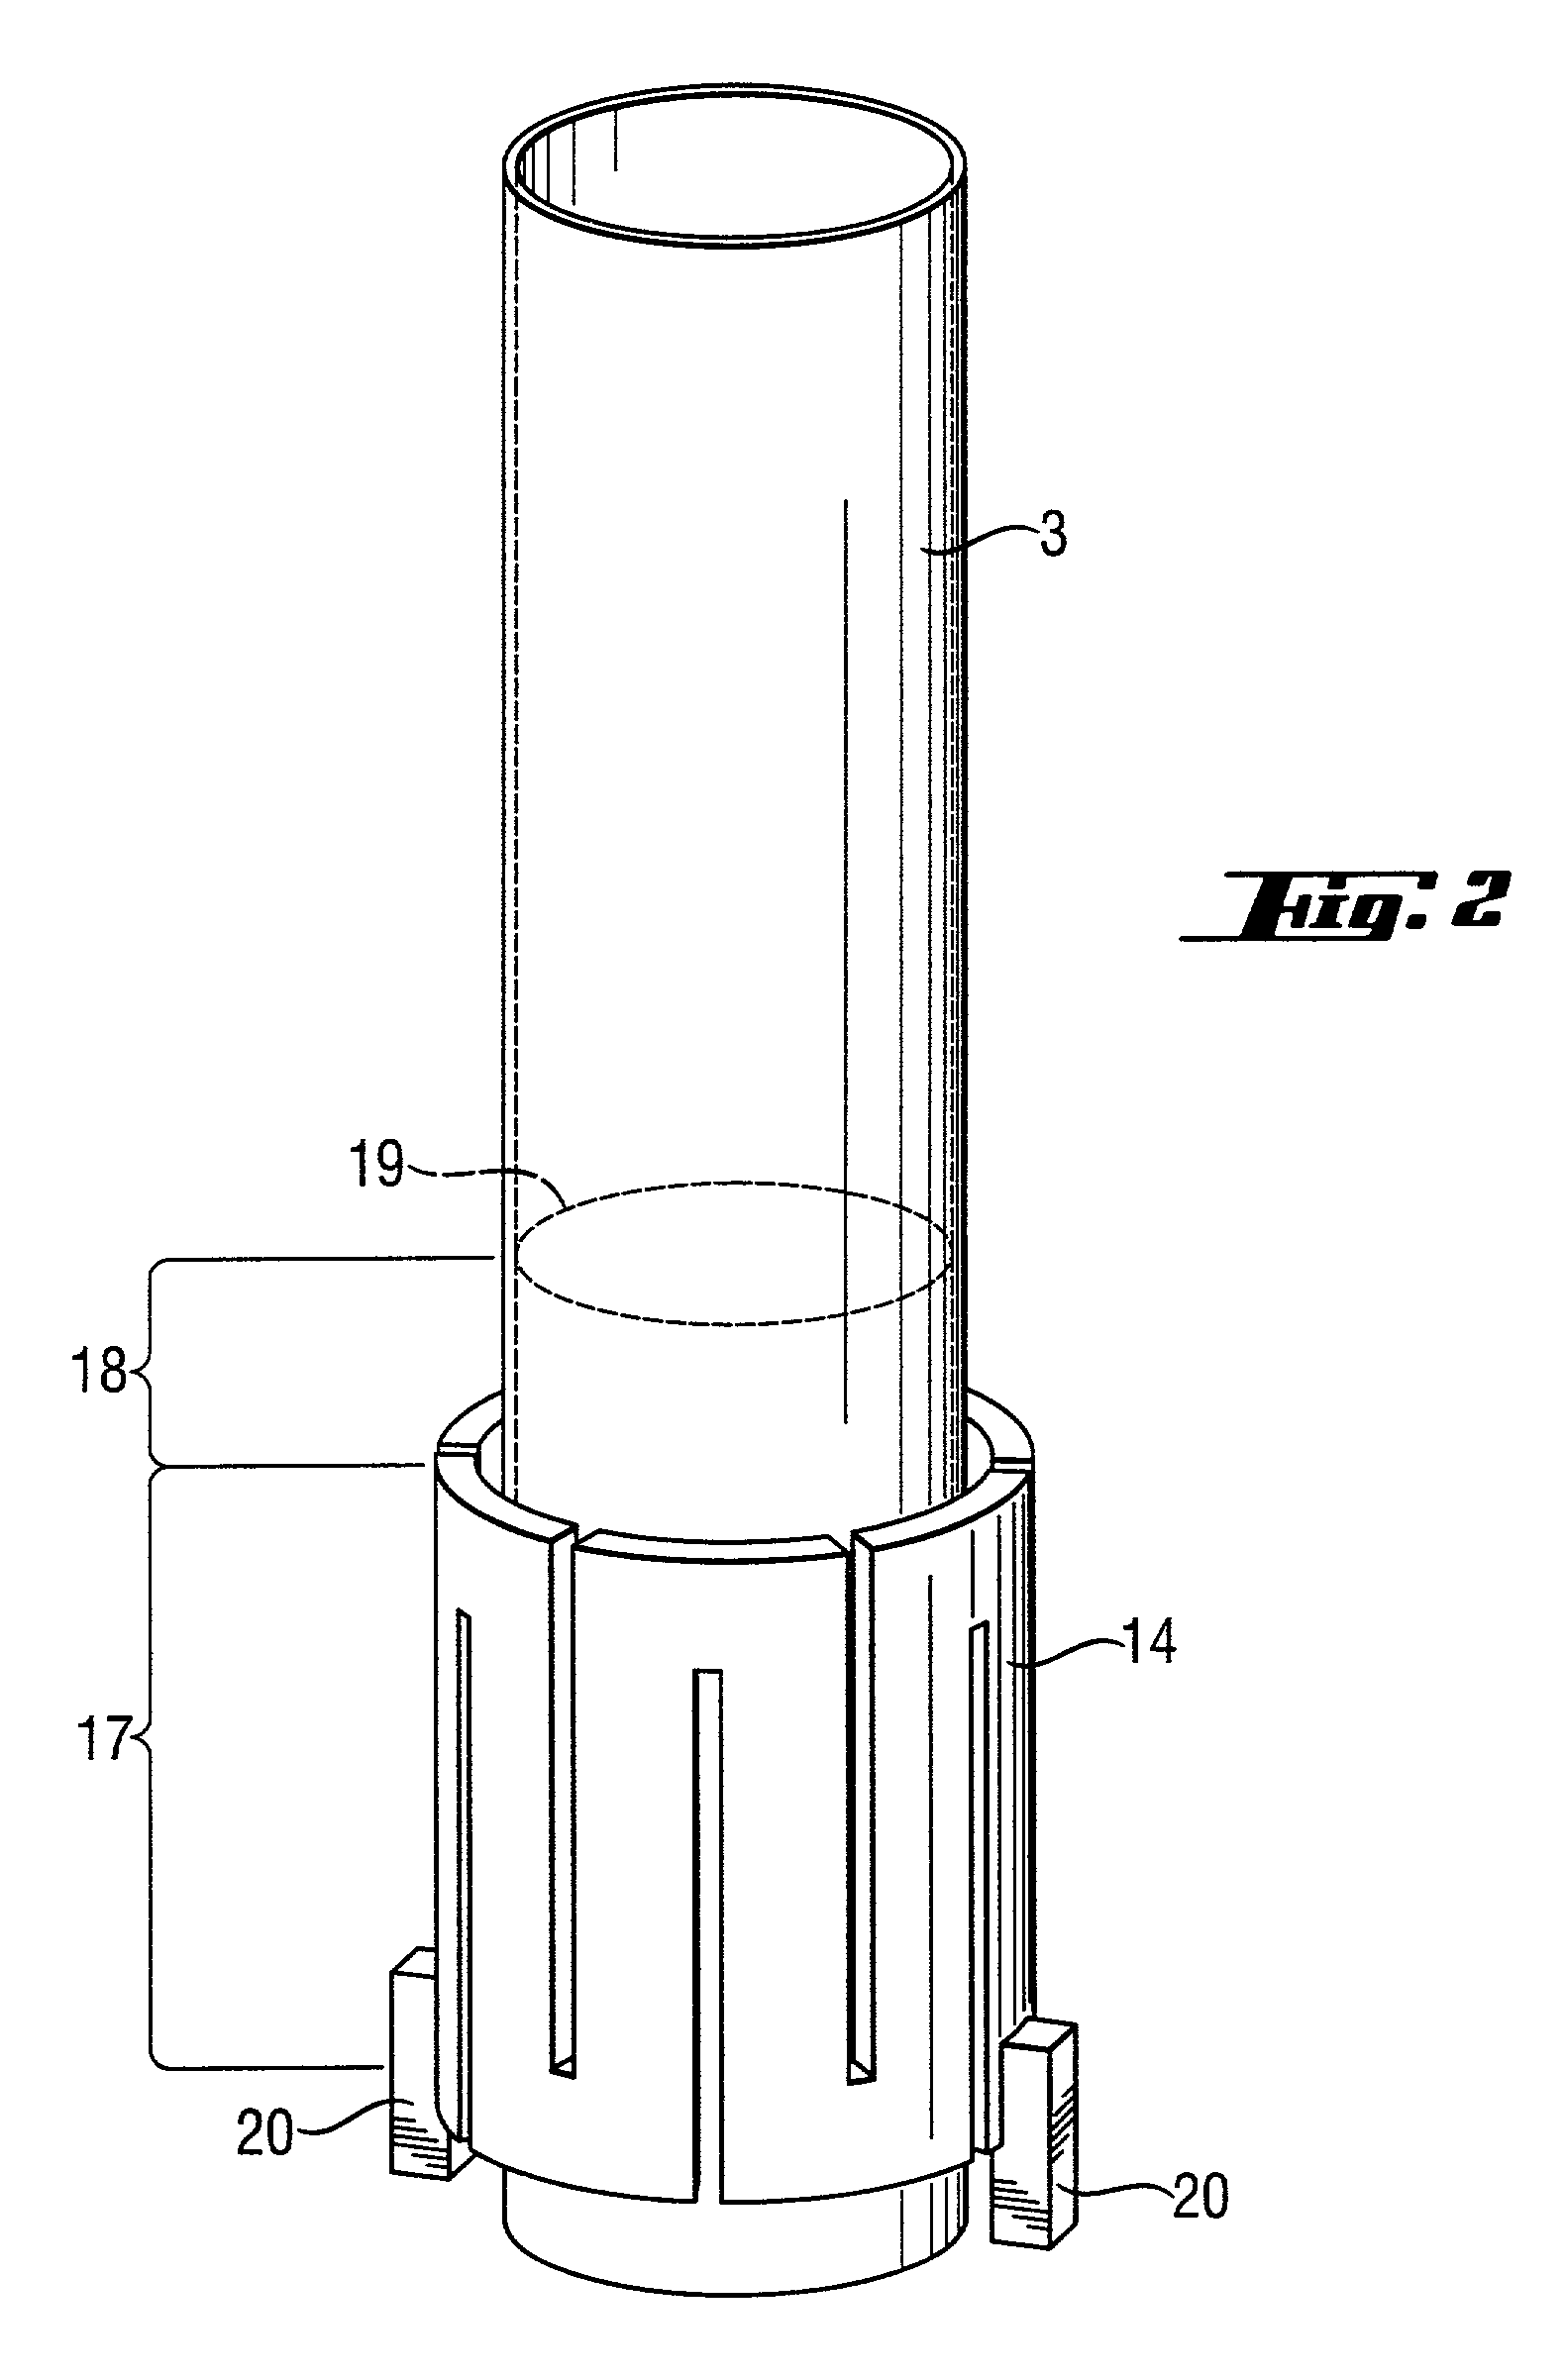 Radiation-heated fluidized-bed reactor